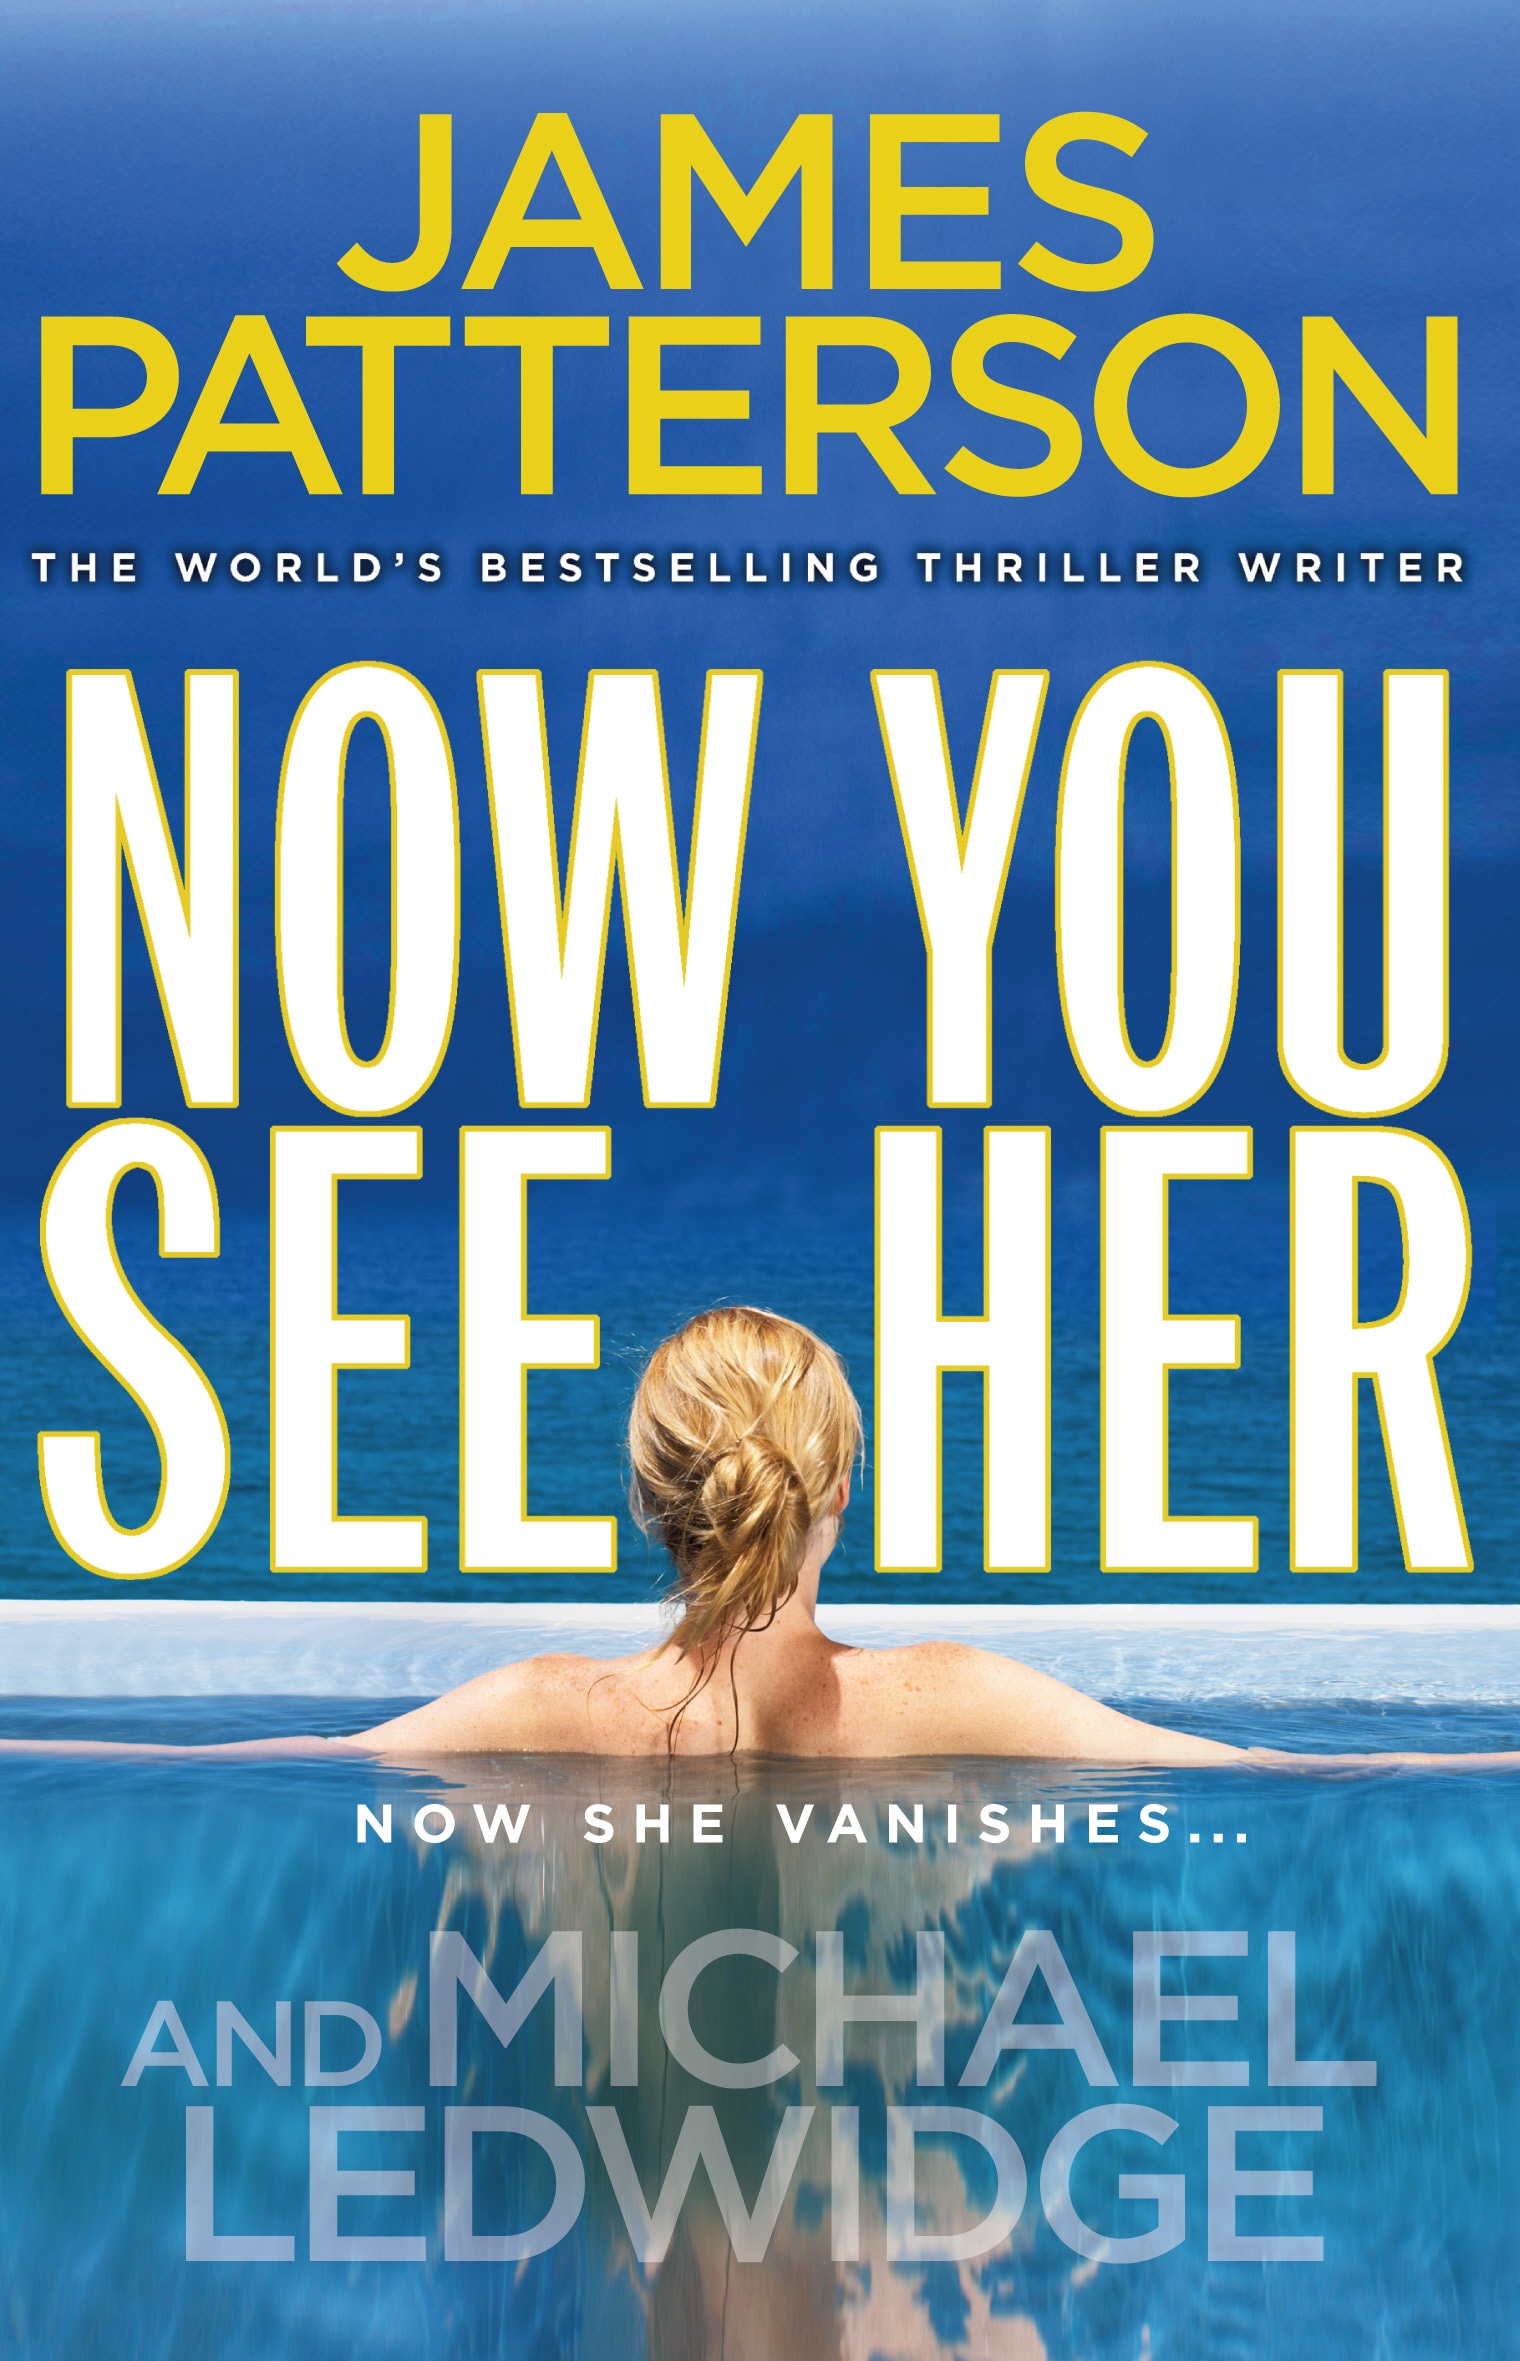 Book “Now You See Her” by James Patterson